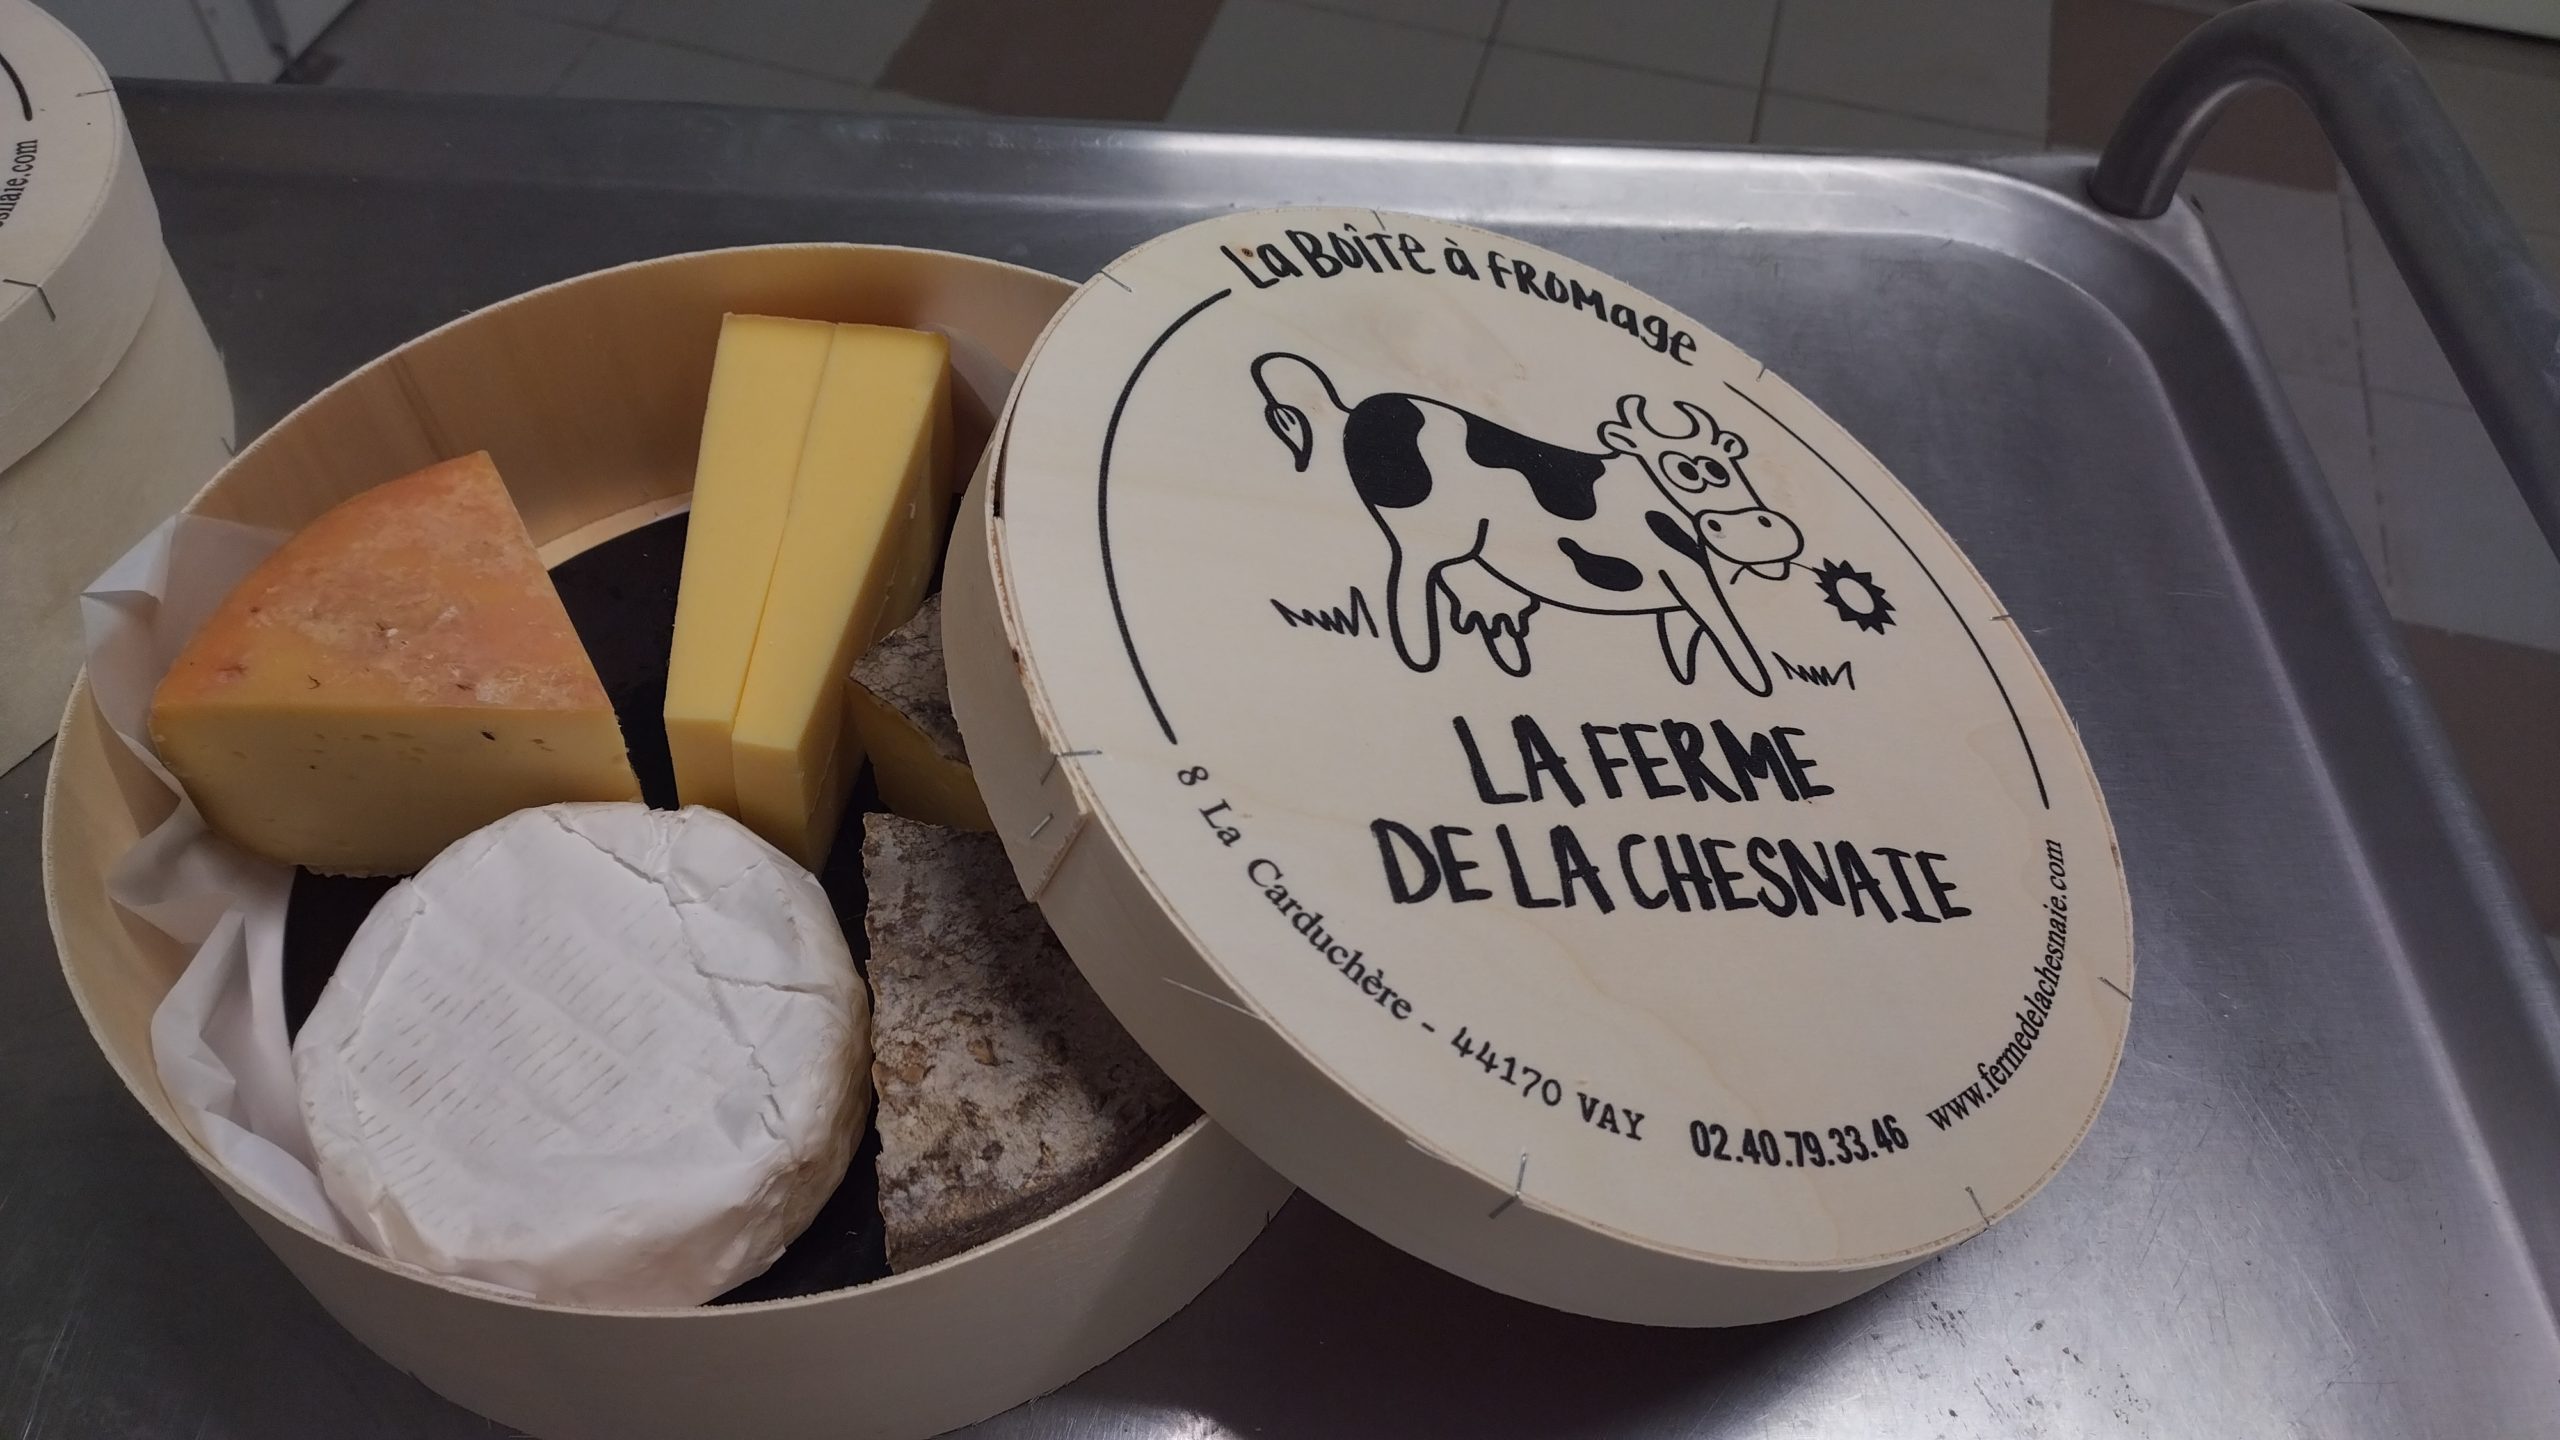 boite fromage 23€